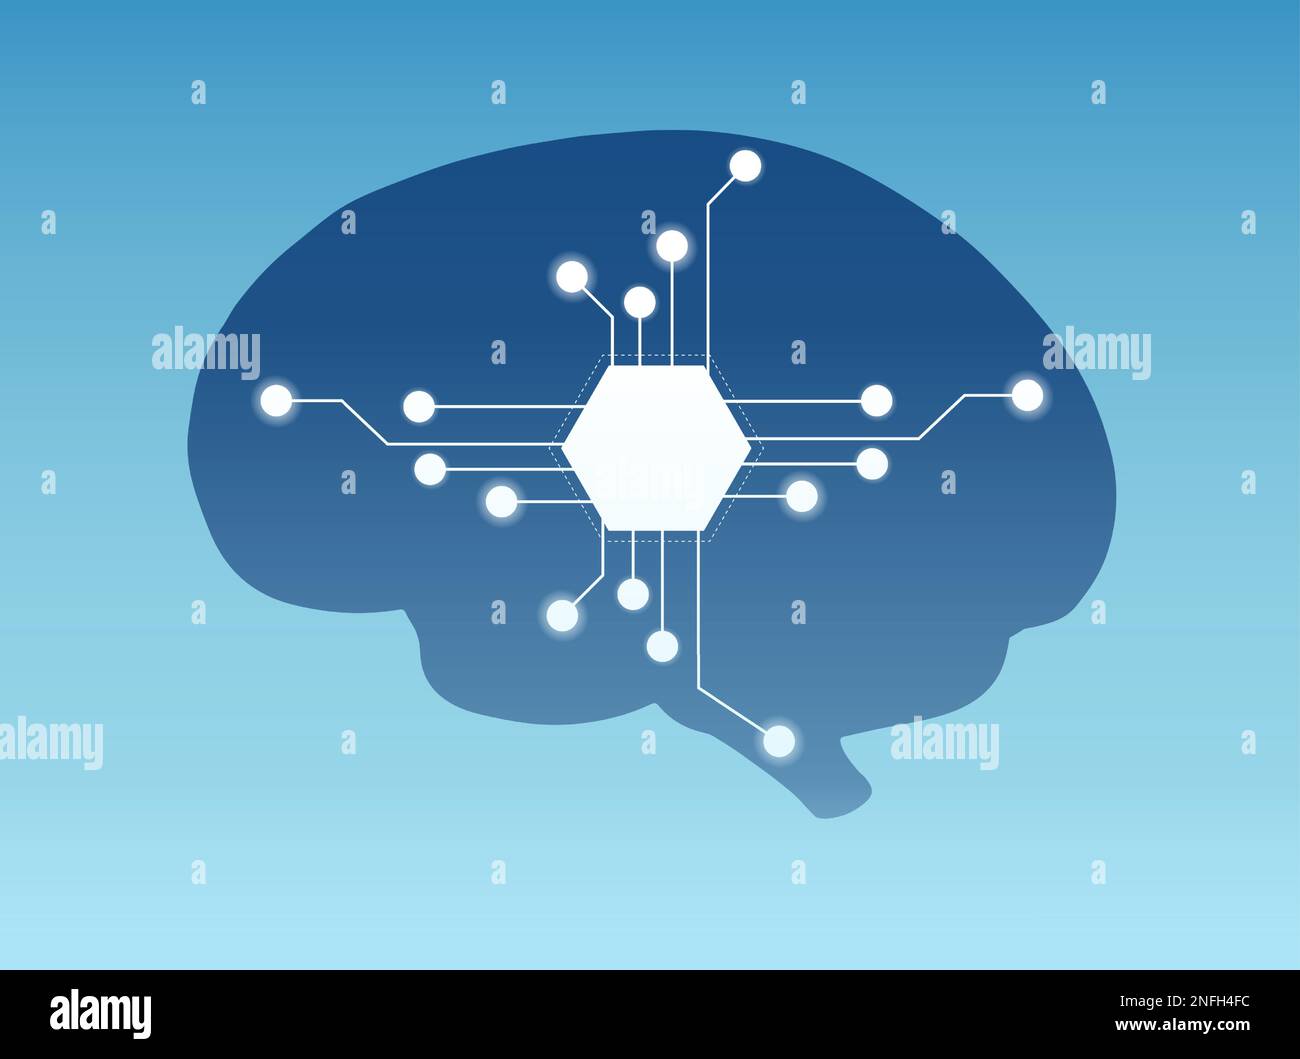 Vector of a human brain with a micro chip implant Stock Vector